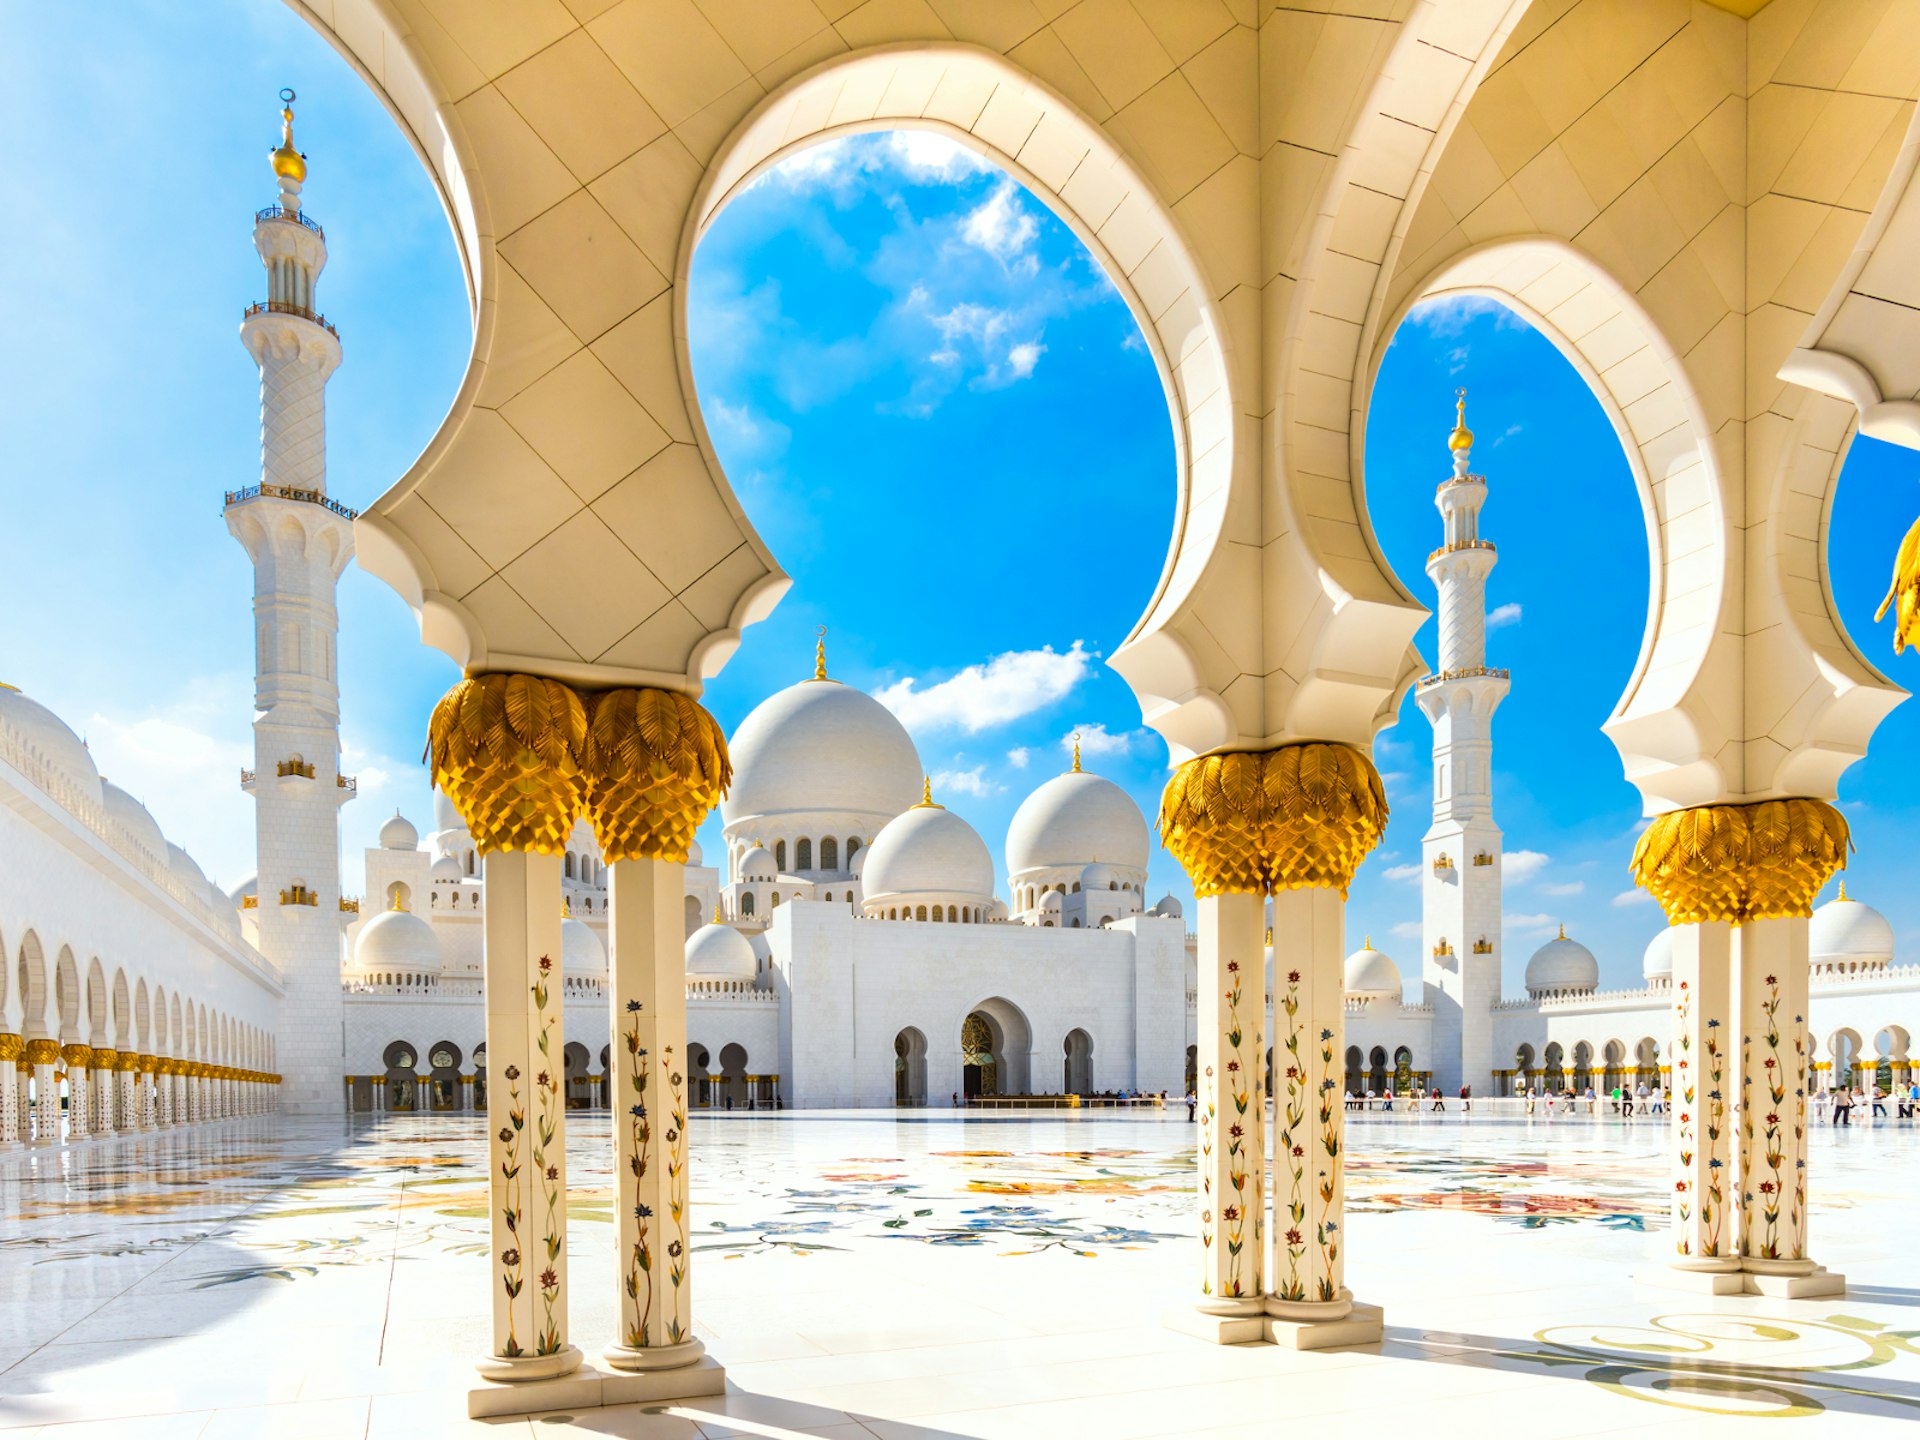 Looking through some archways at the sunlit front of the Sheikh Zayed Mosque with many white domes topped with gold